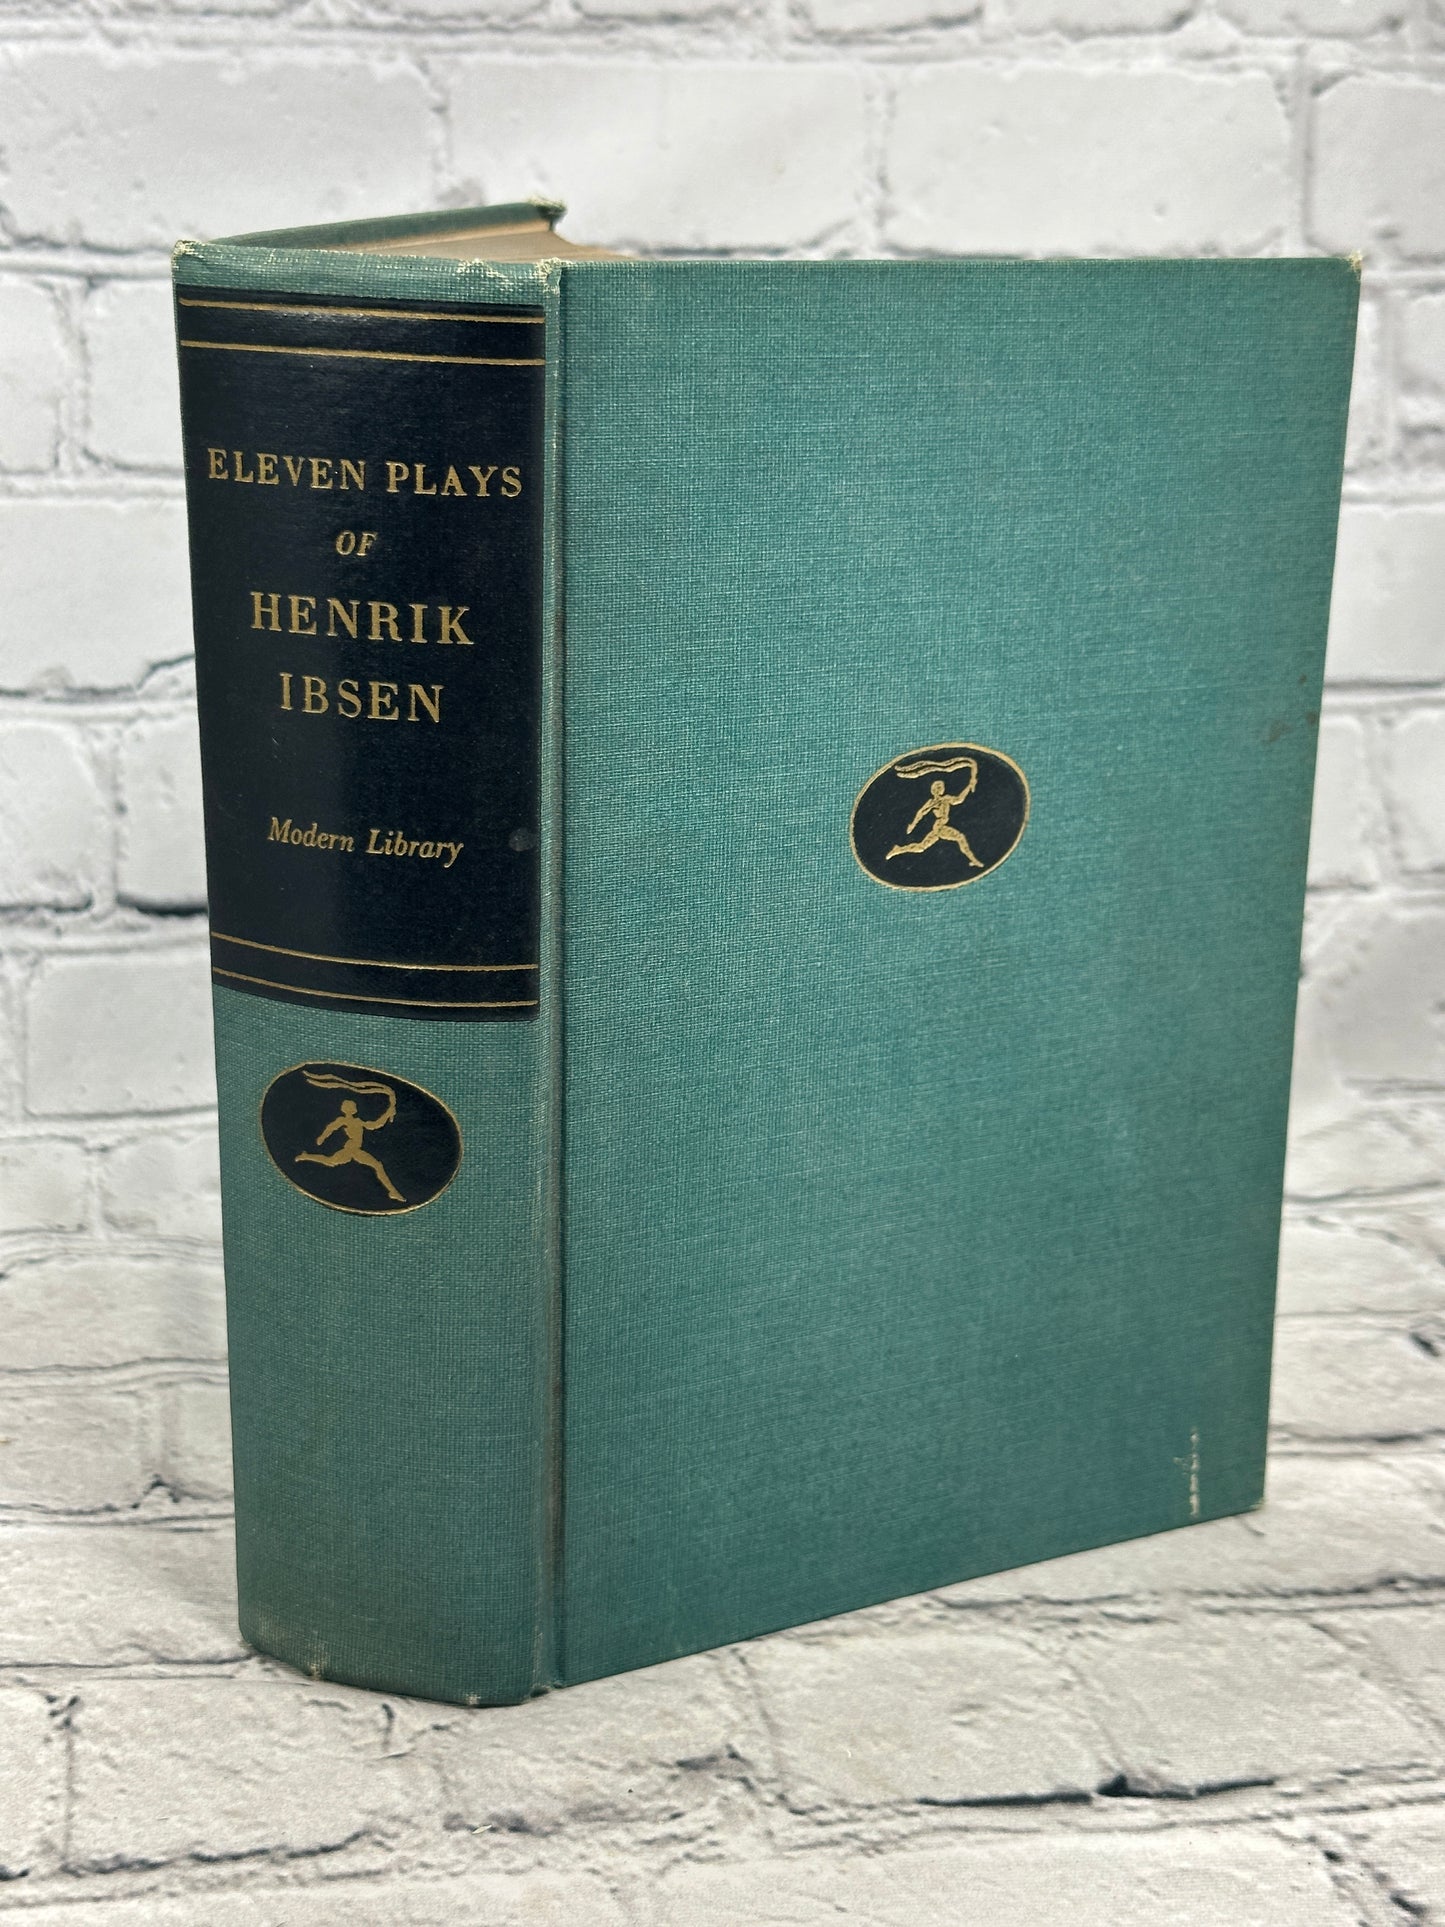 Eleven Plays of Henrik Ibsen [The Modern Library]